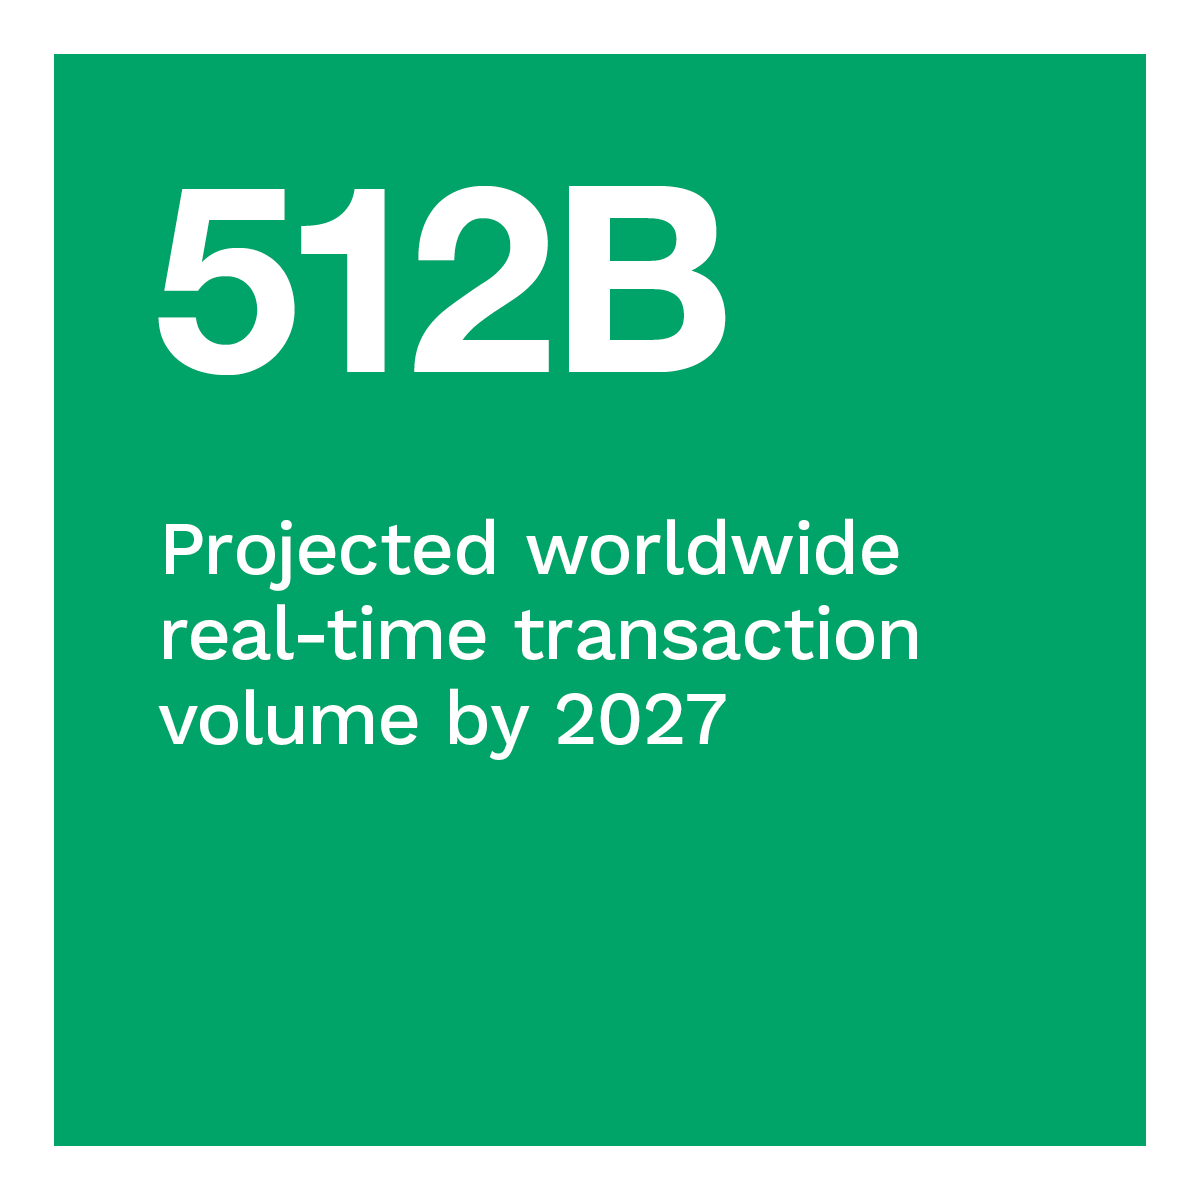  Projected worldwide real-time transaction volume by 2027